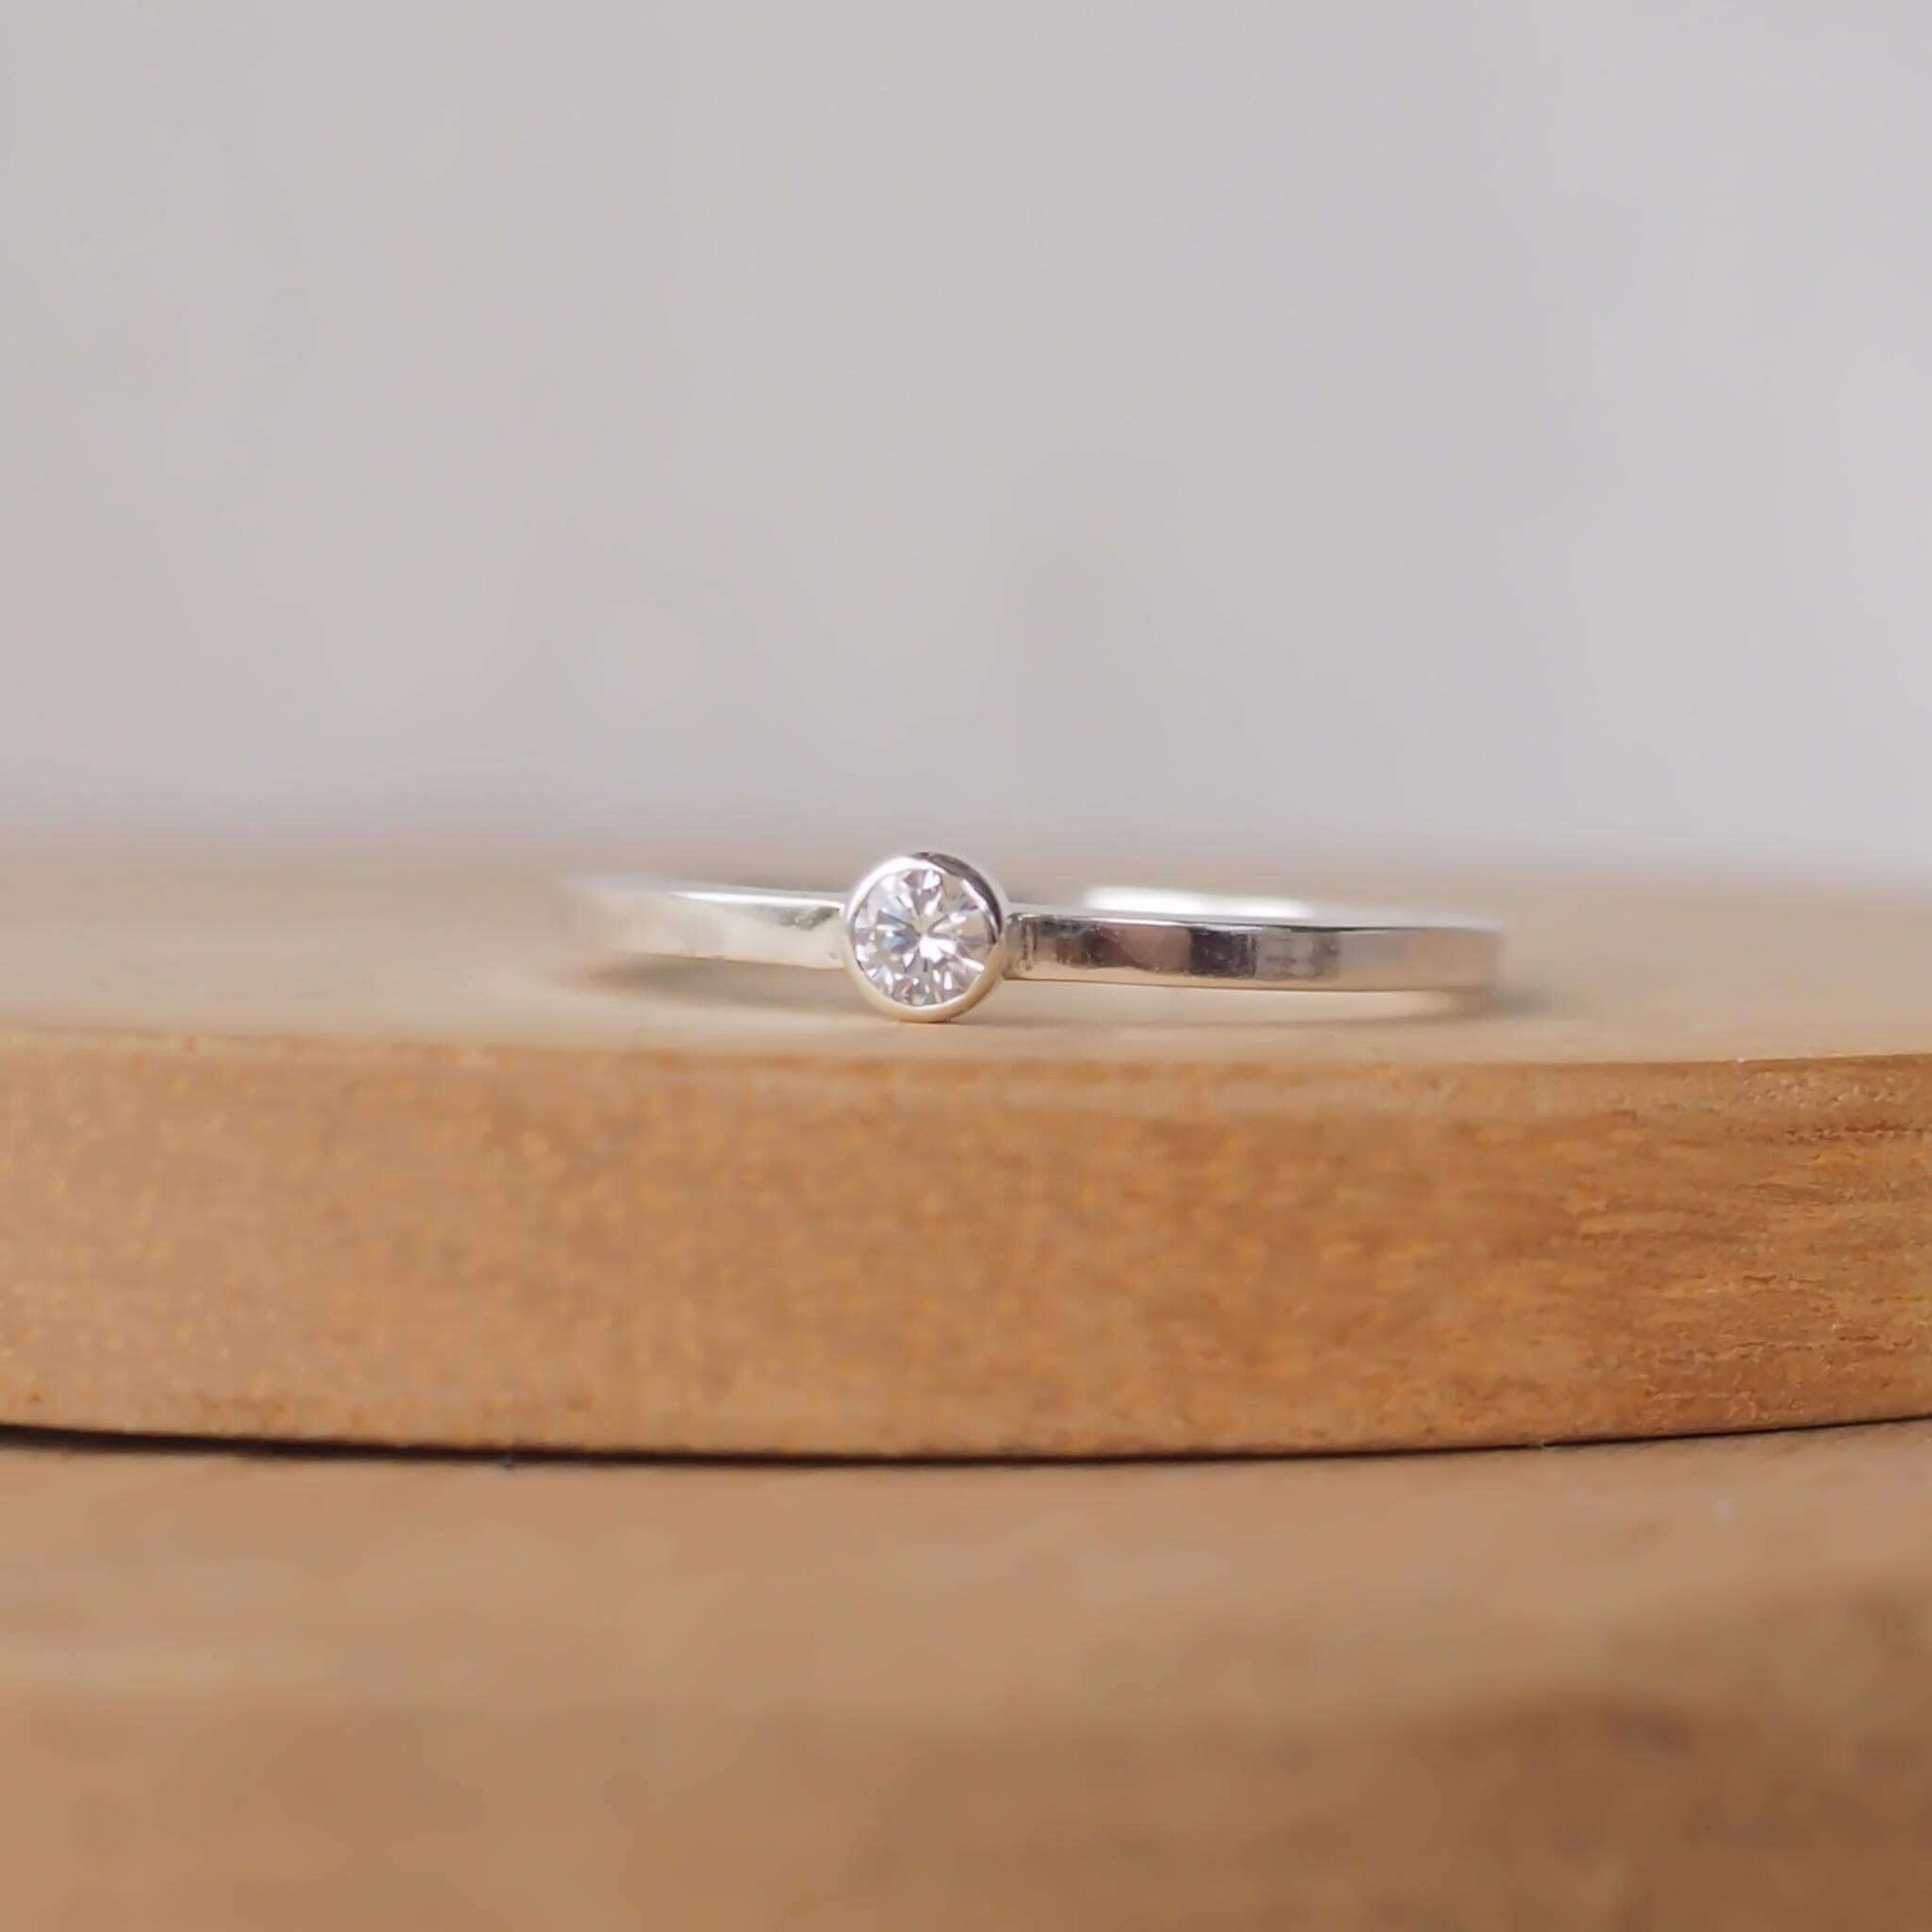 Imitation Diamond and silver minimalist solitaire ring. Made from a modern band of square silver wire with a simple round faceted cubic zirconia. Handmade in Scotland by Maram Jewellery